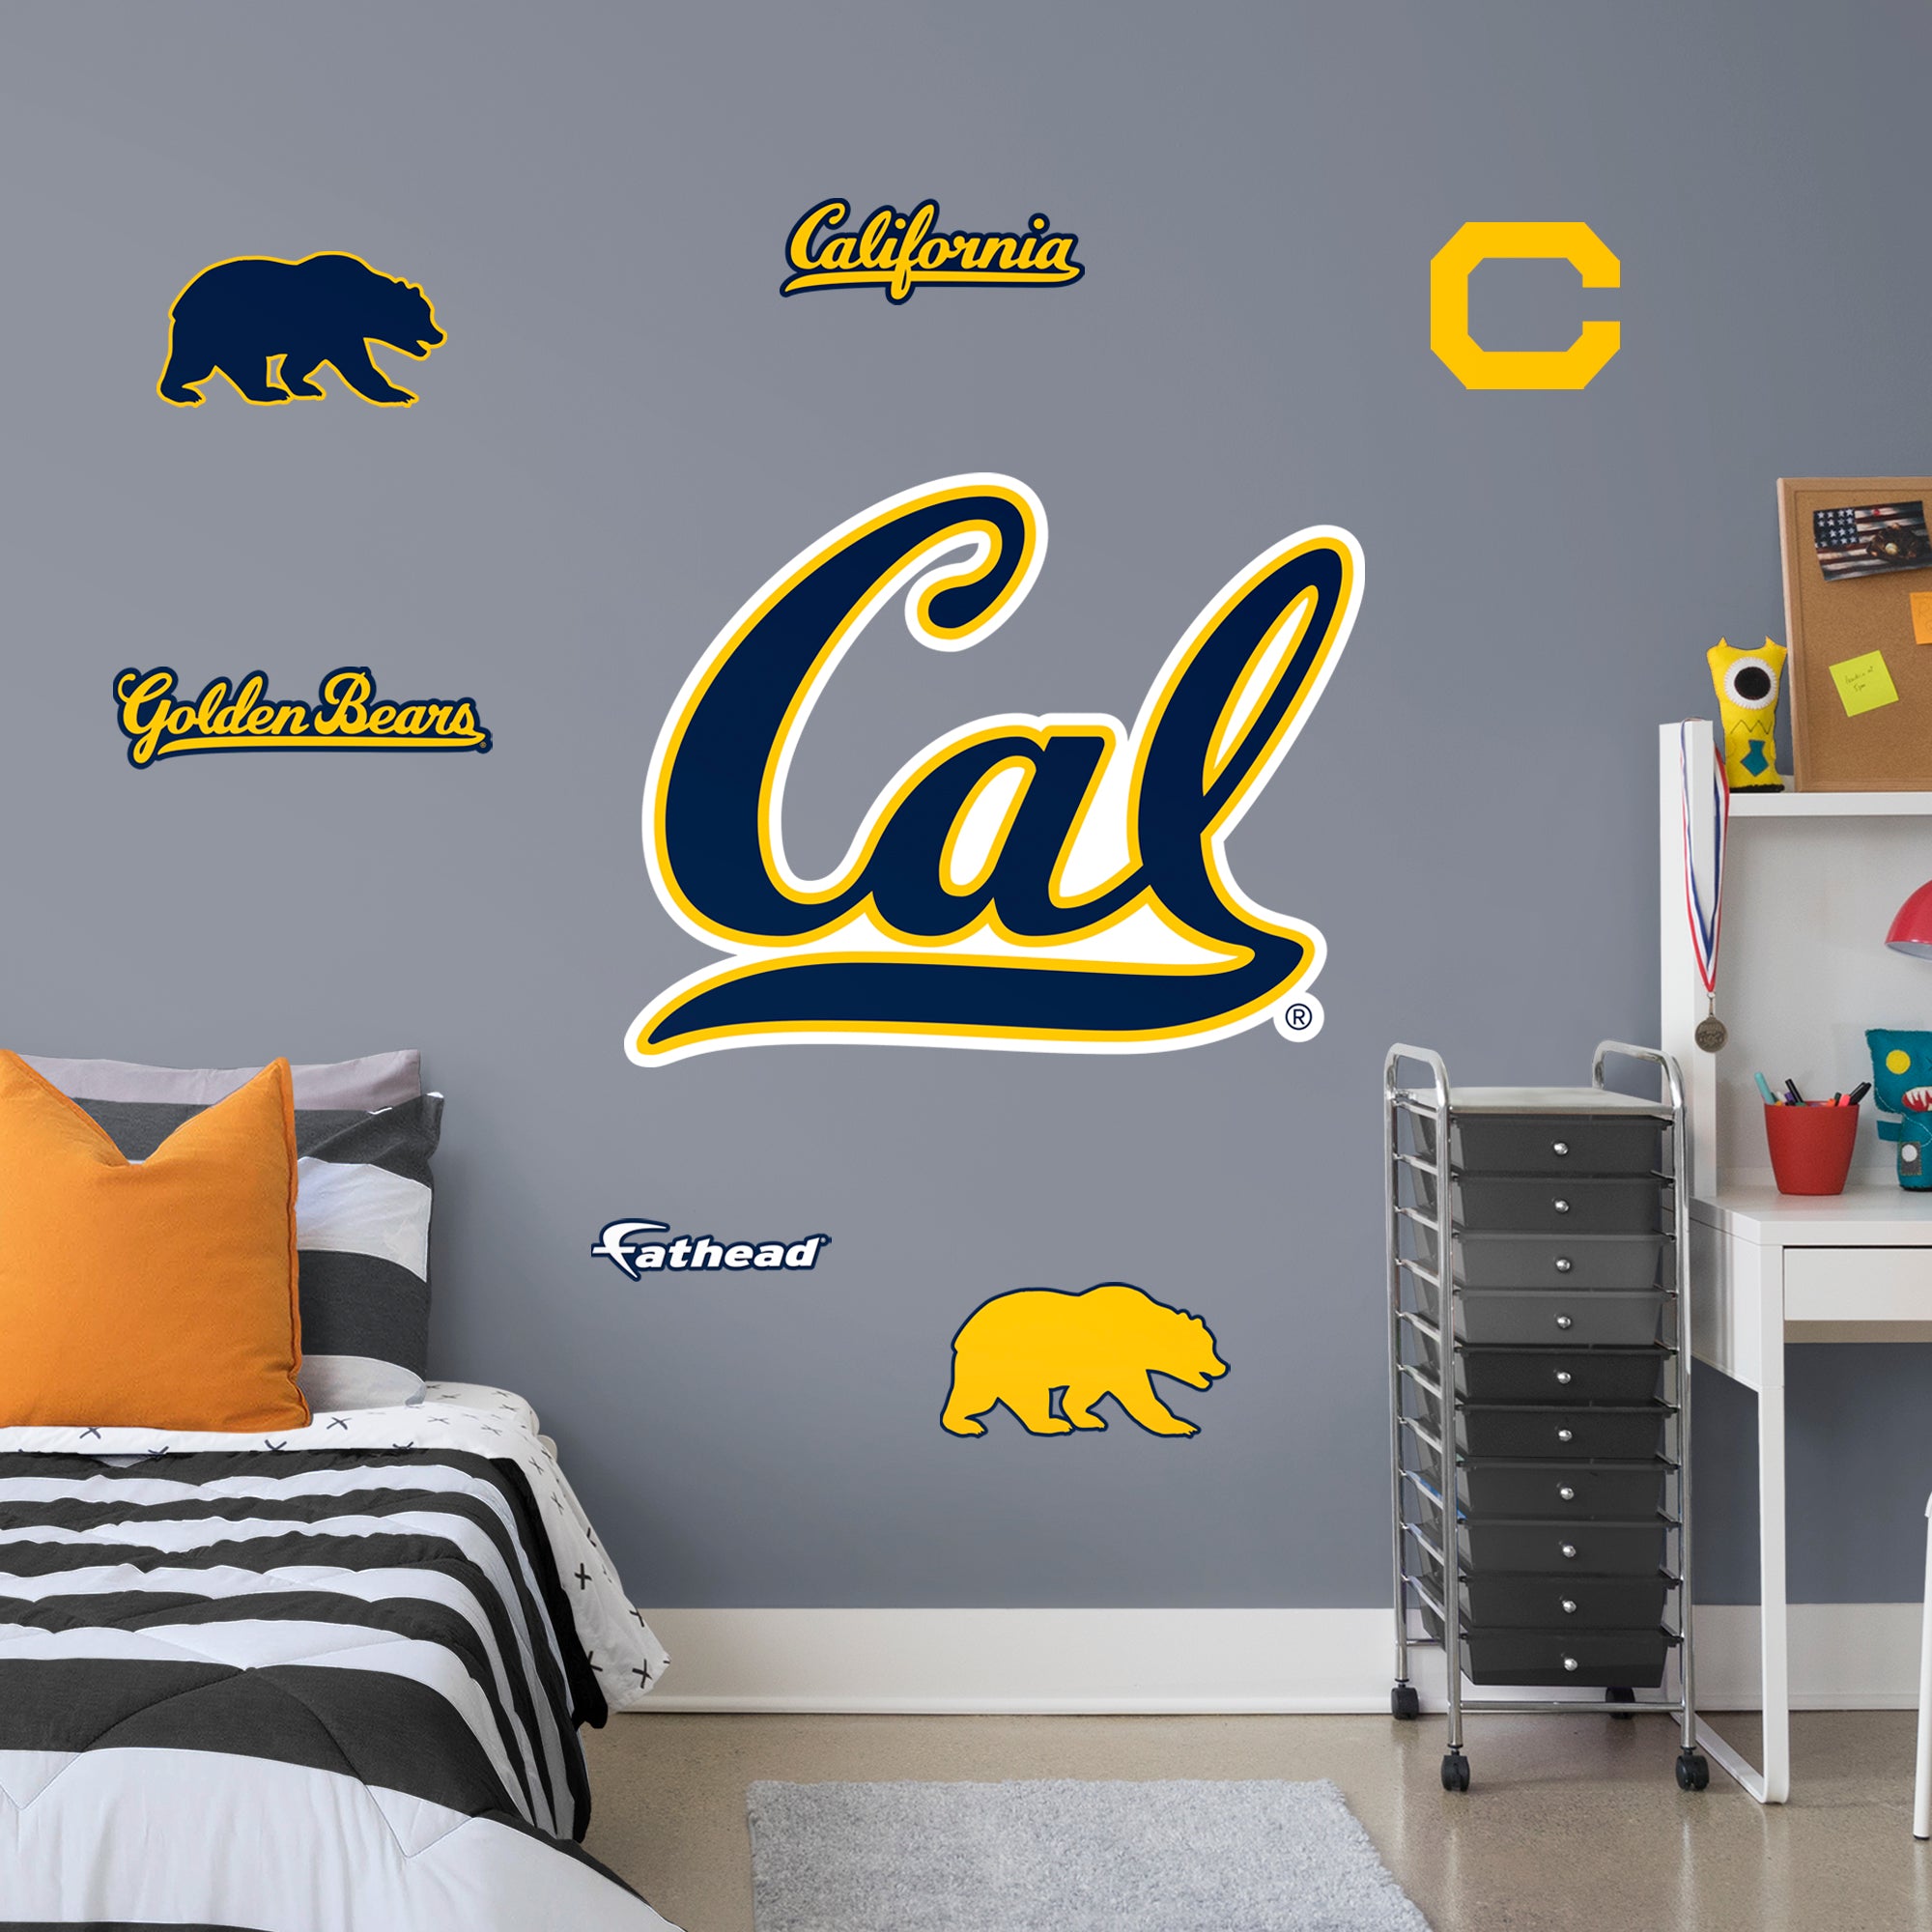 Cal Golden Bears 2020 RealBig Logo - Officially Licensed NCAA Removable Wall Decal Giant Decal (41"W x 33"H) by Fathead | Vinyl